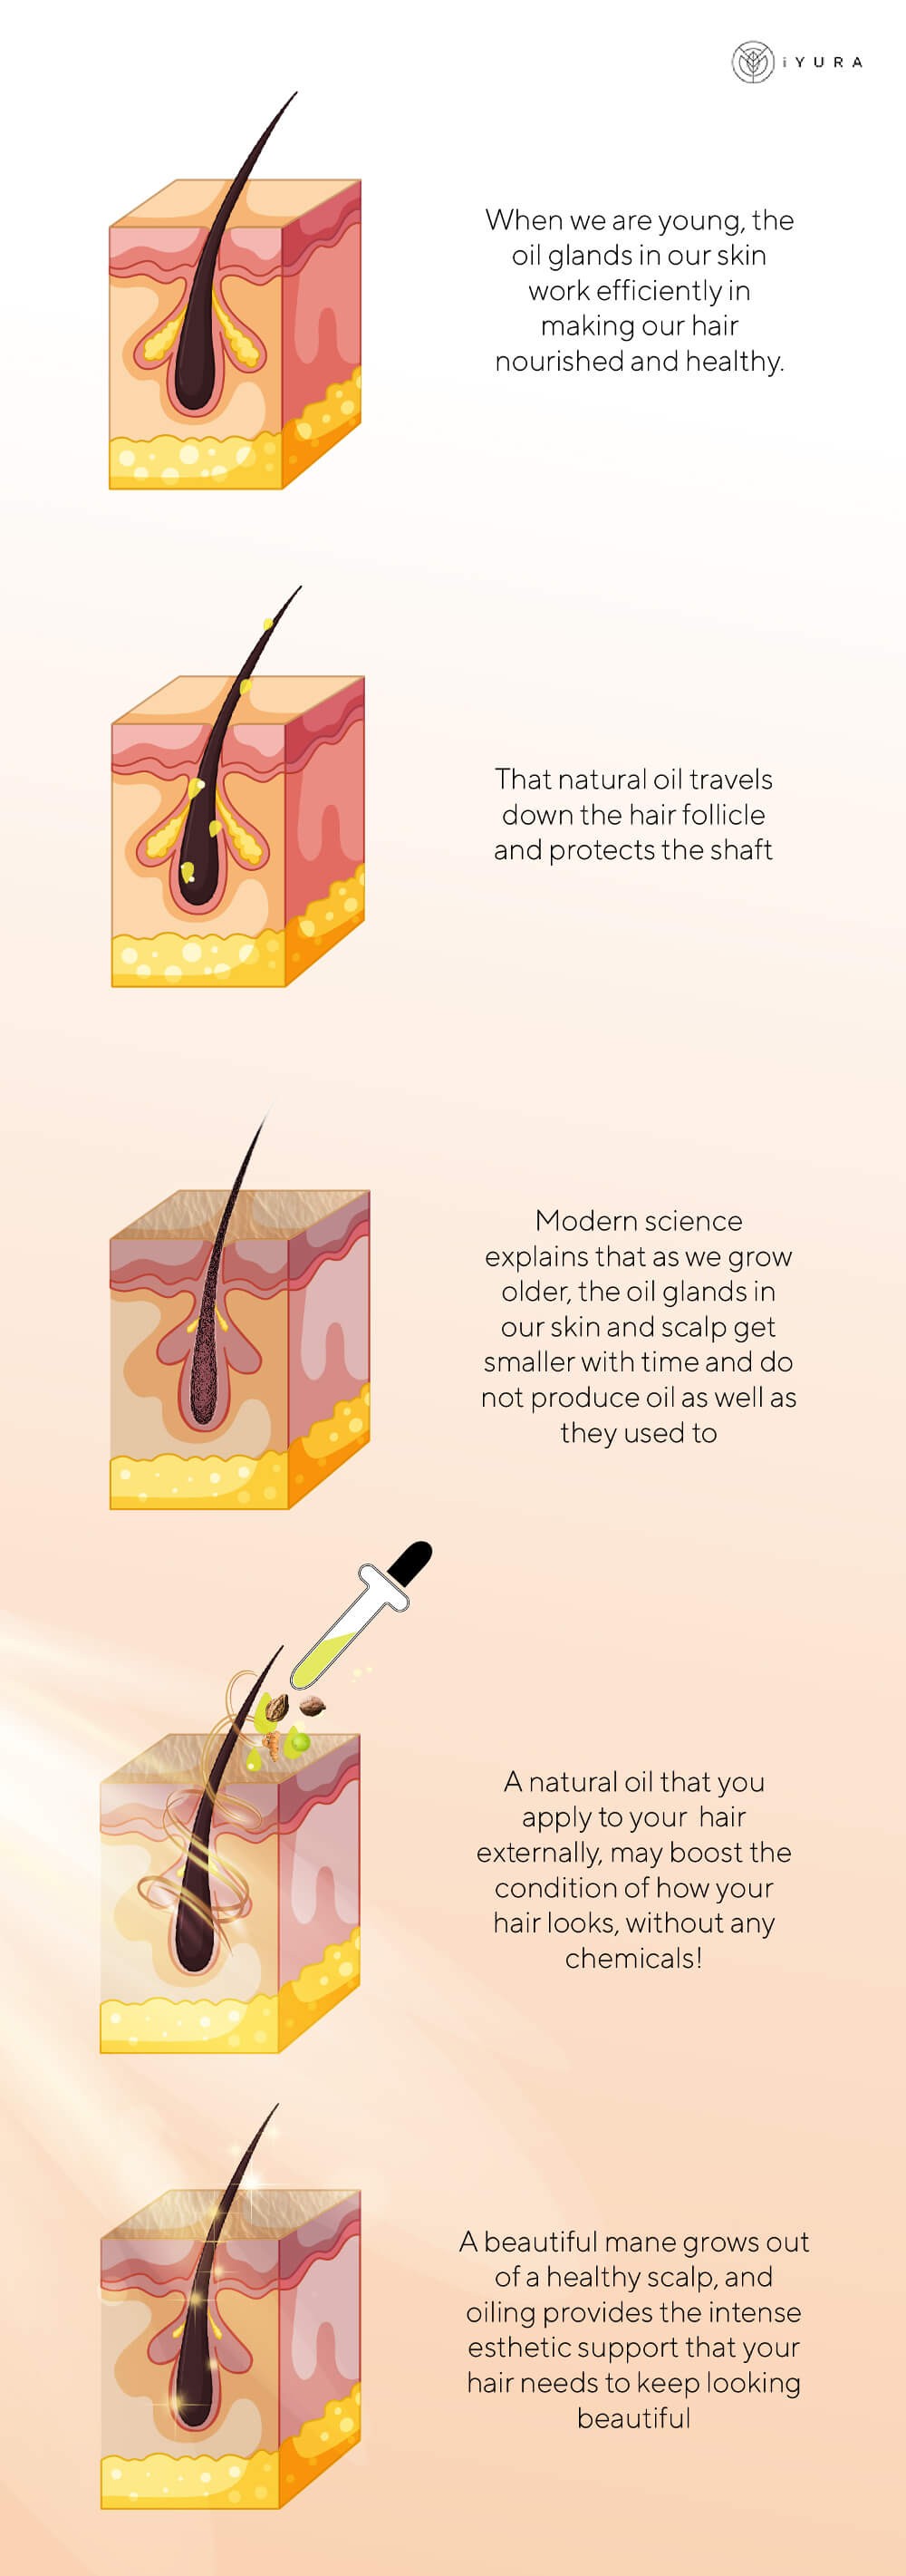 Interestingly, modern science explains that as we grow older, the oil glands in our skin and scalp get smaller with time and do not produce oil as well or as efficiently as they did in our youth.